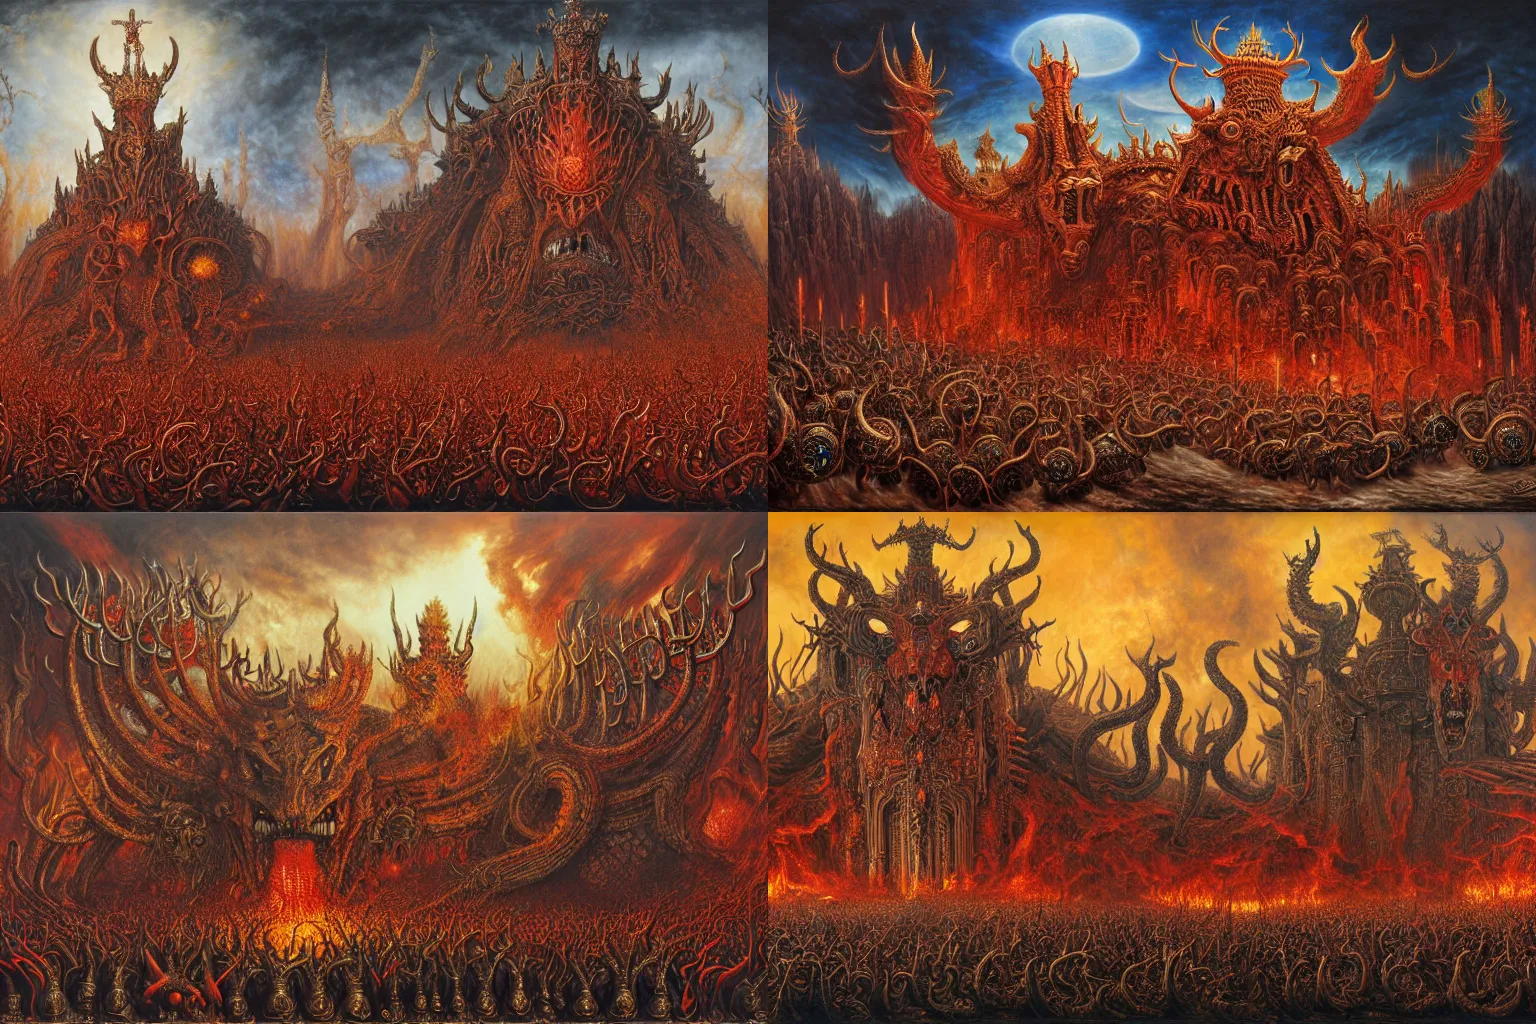 Prompt: diadems, crowns, on a ten horned beast with seven heads, fiery red, detailed, intricate, matte painting by Mariusz Lewandowski, Giger and Jacek Yerka